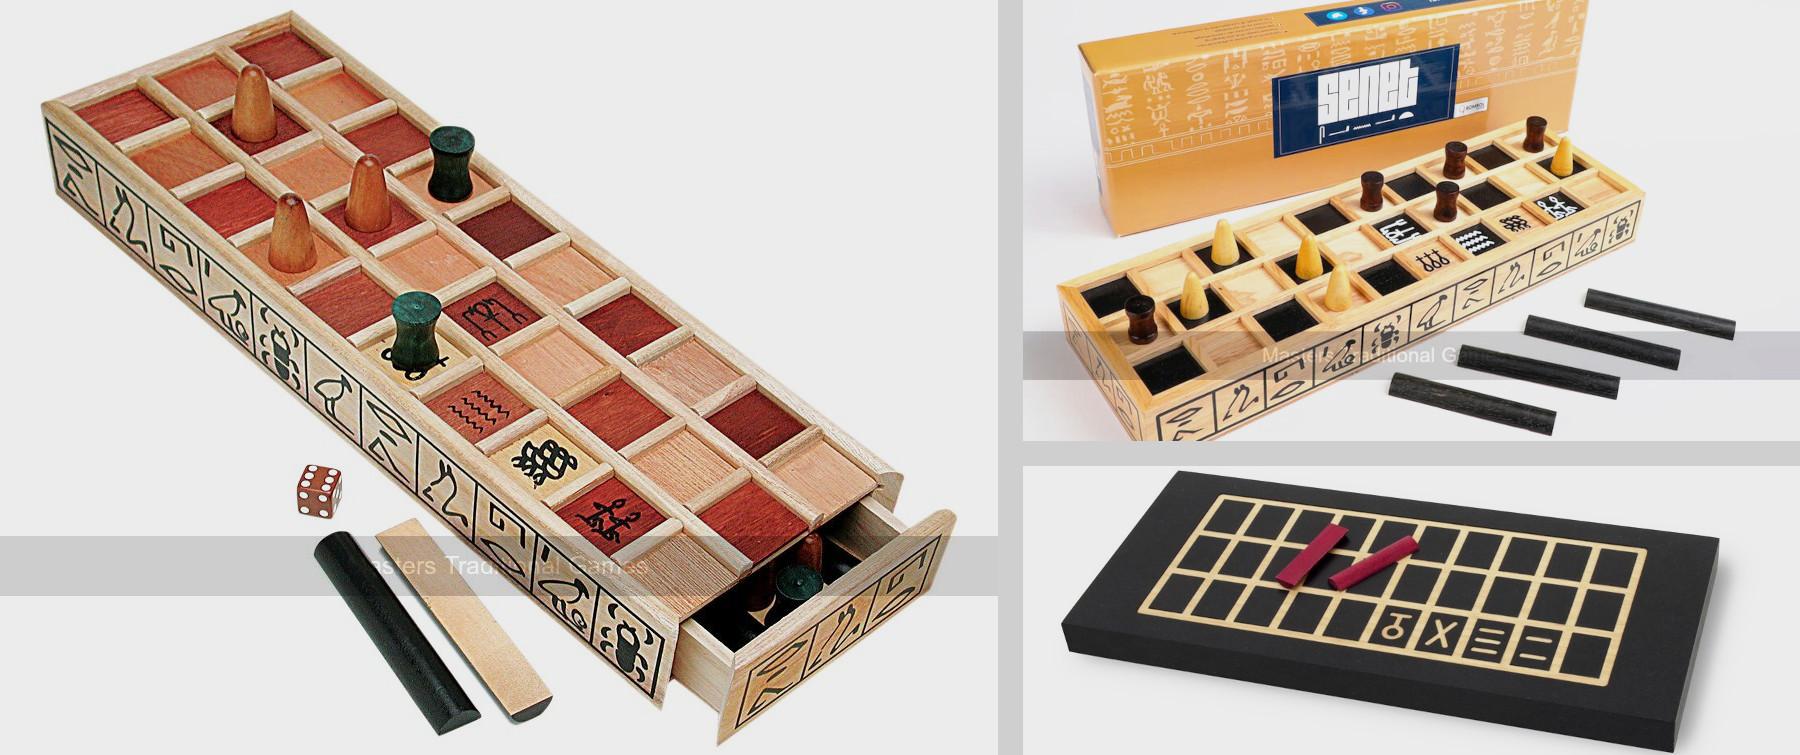 Photos of Senet boards sold by Masters Traditional Games